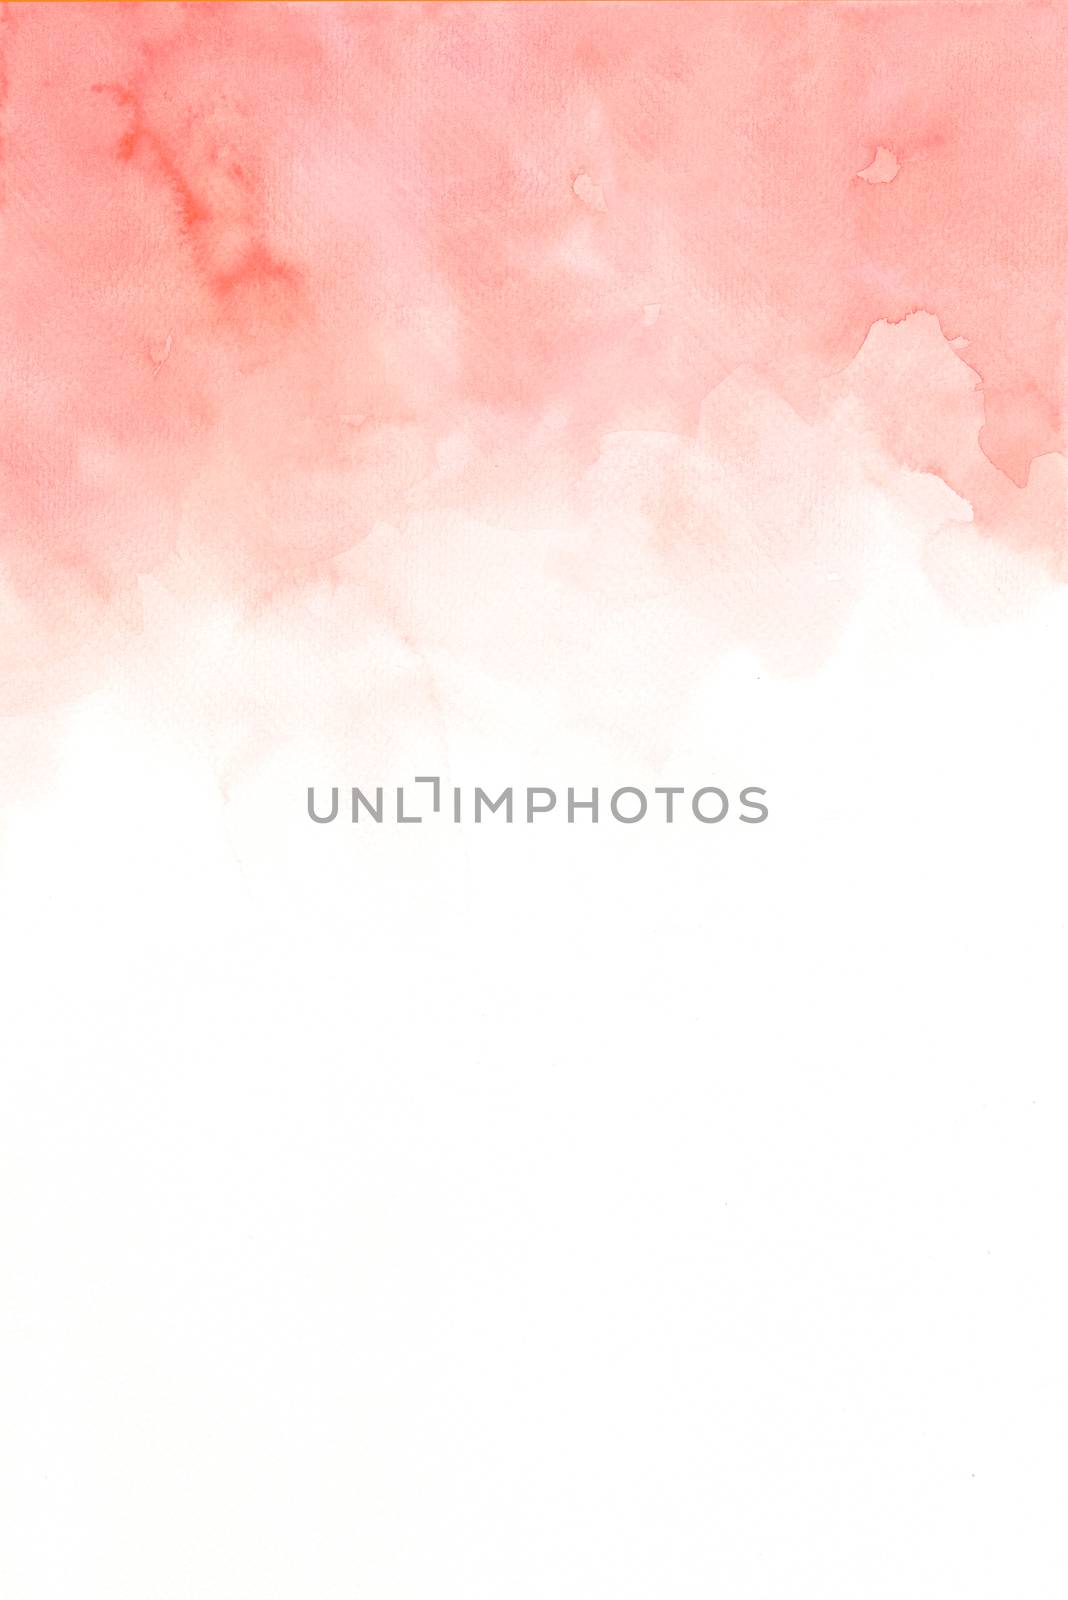 Hand painted abstract orange and pink watercolor on white background. by Ungamrung